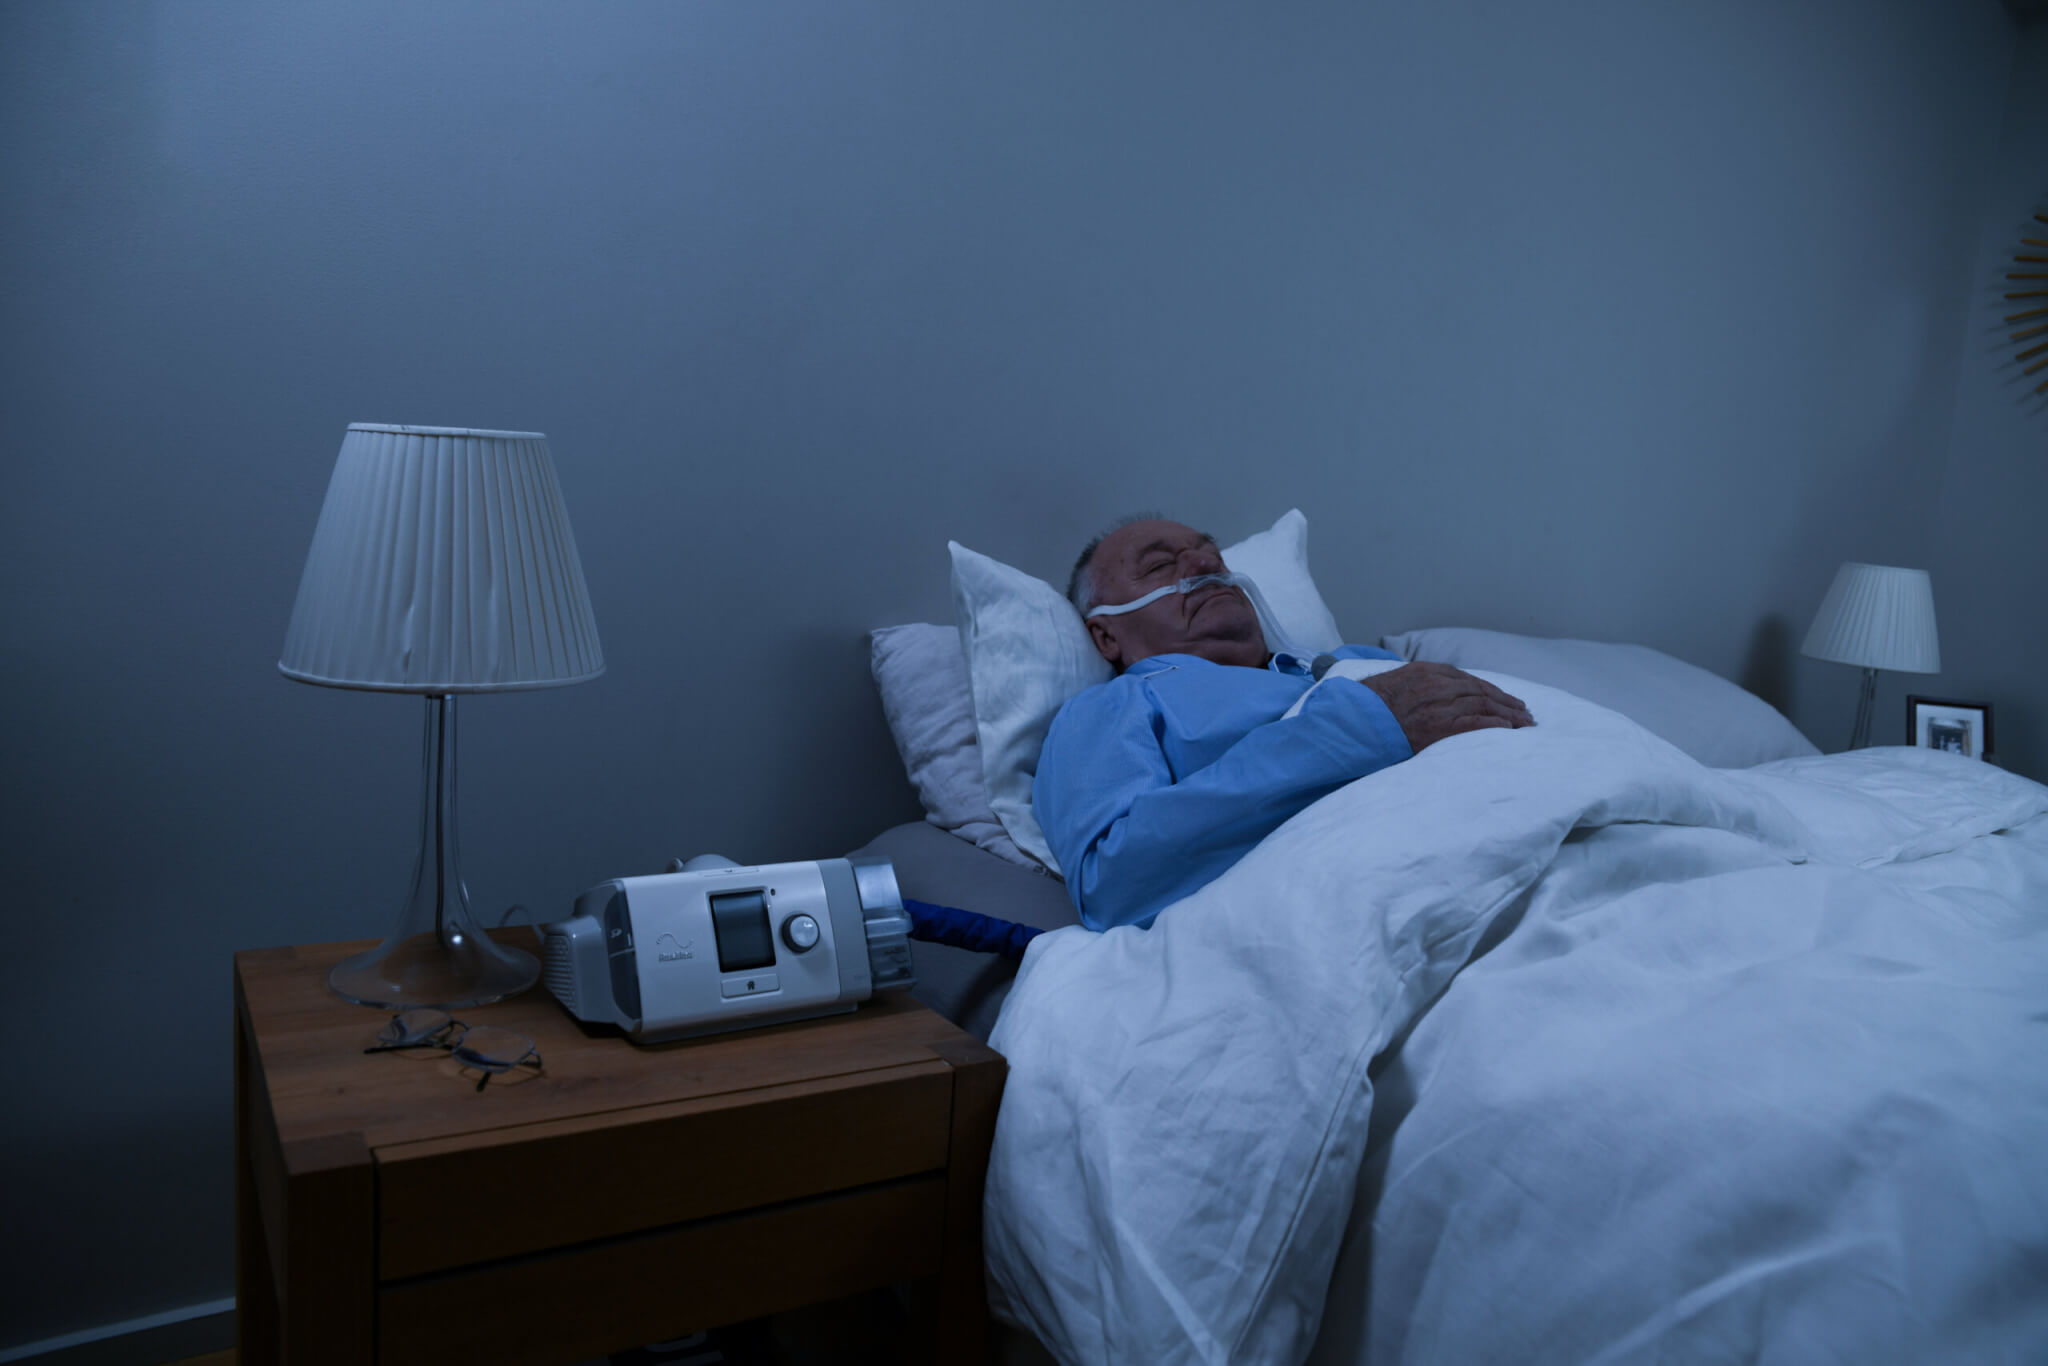 A male COPD patient sleeping in bed at home while receiving HFT